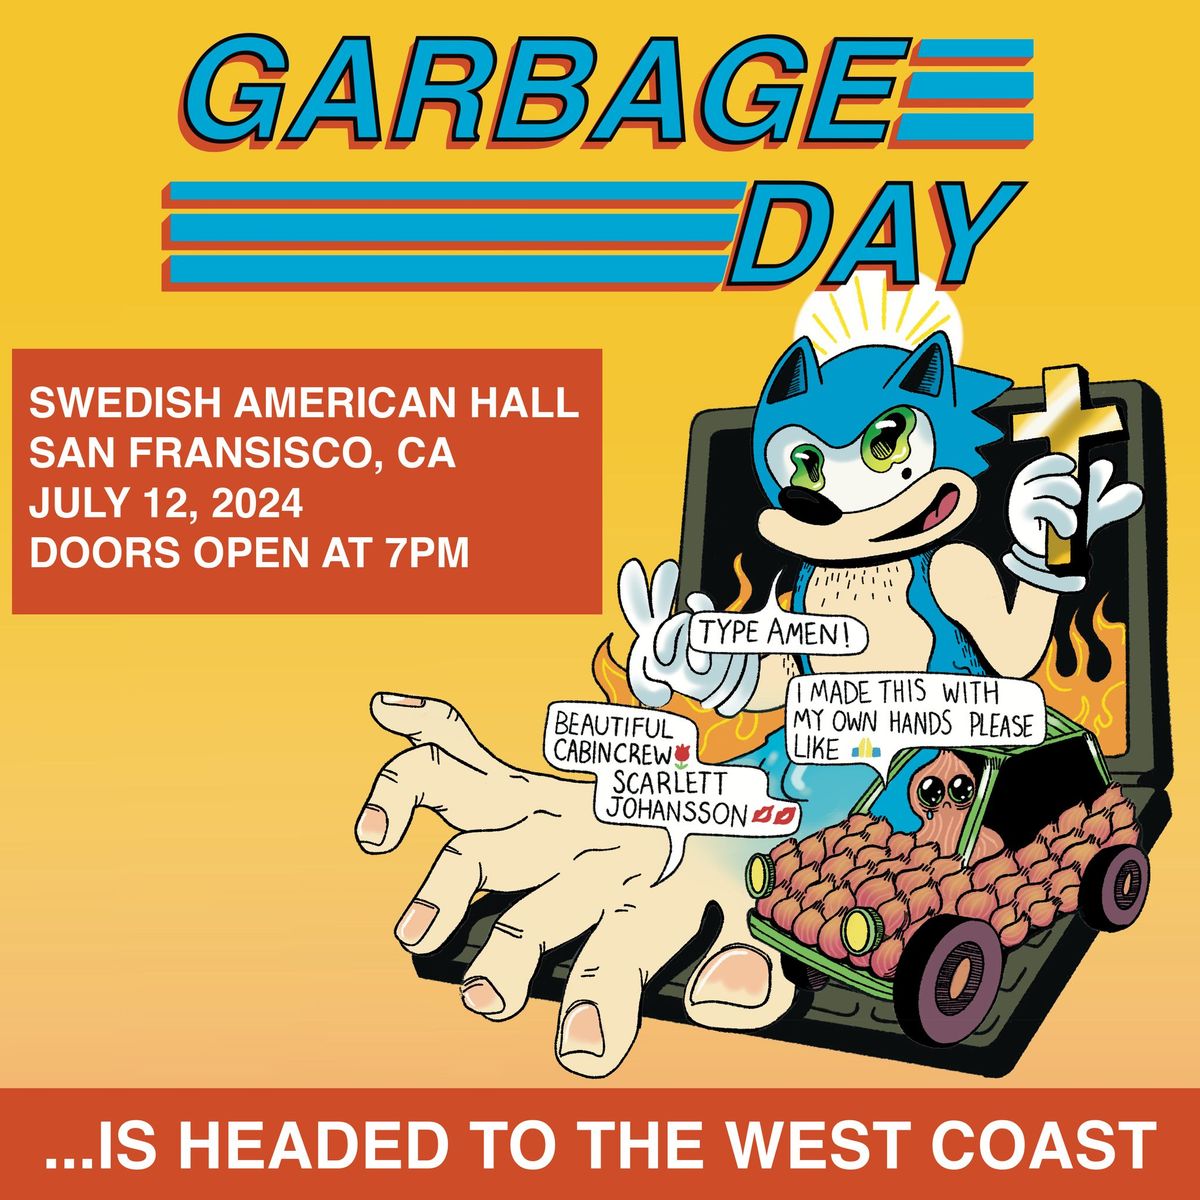 GARBAGE DAY LIVE